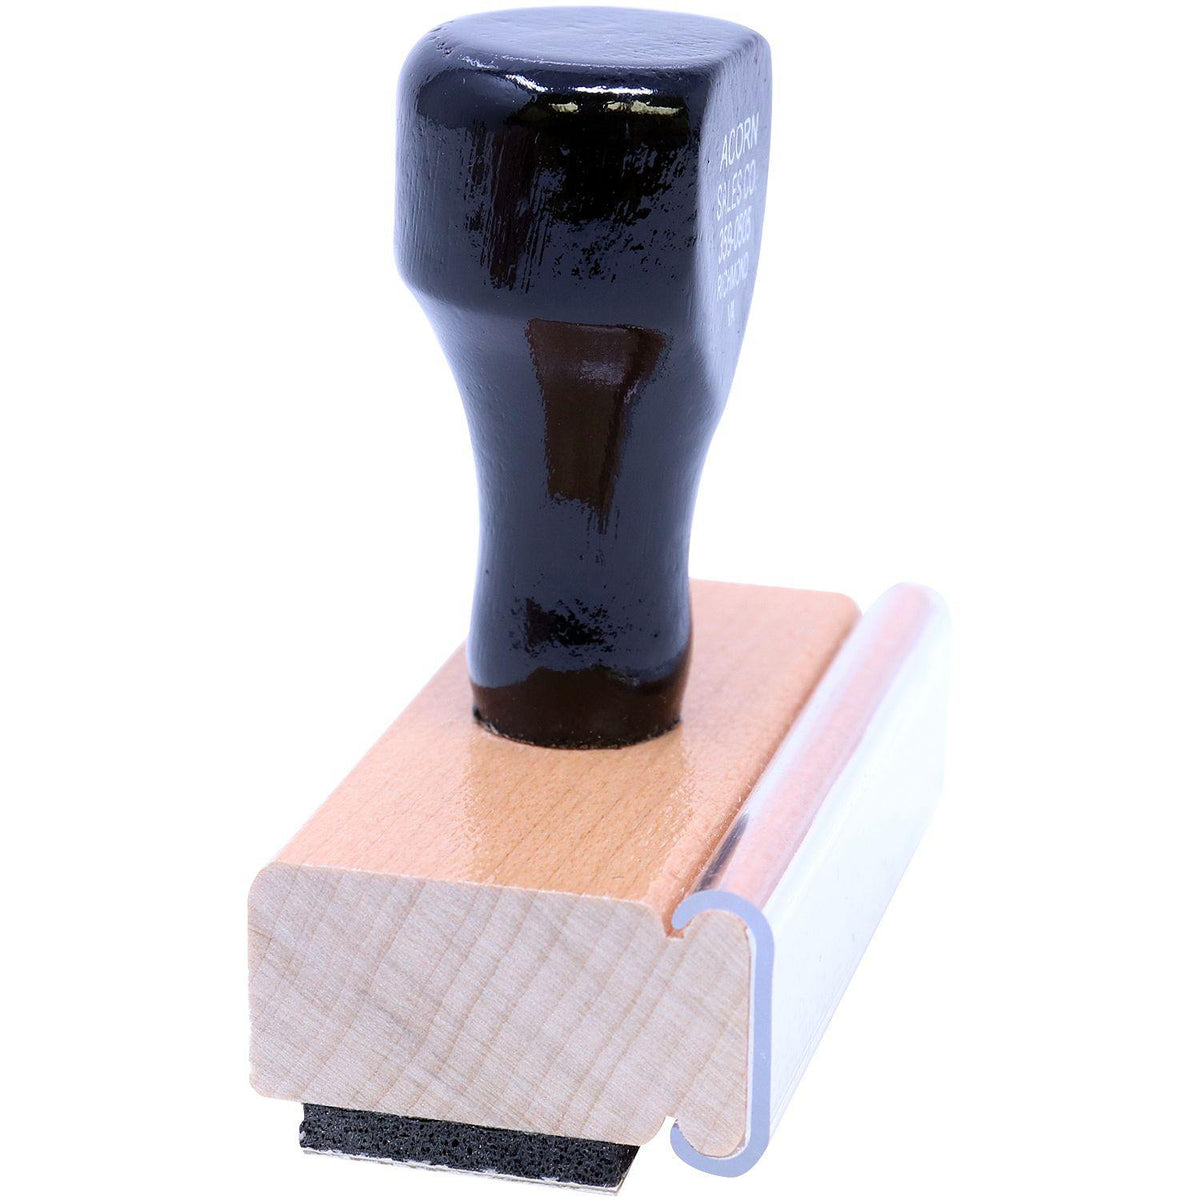 Side View of Large Copia Rubber Stamp at an Angle